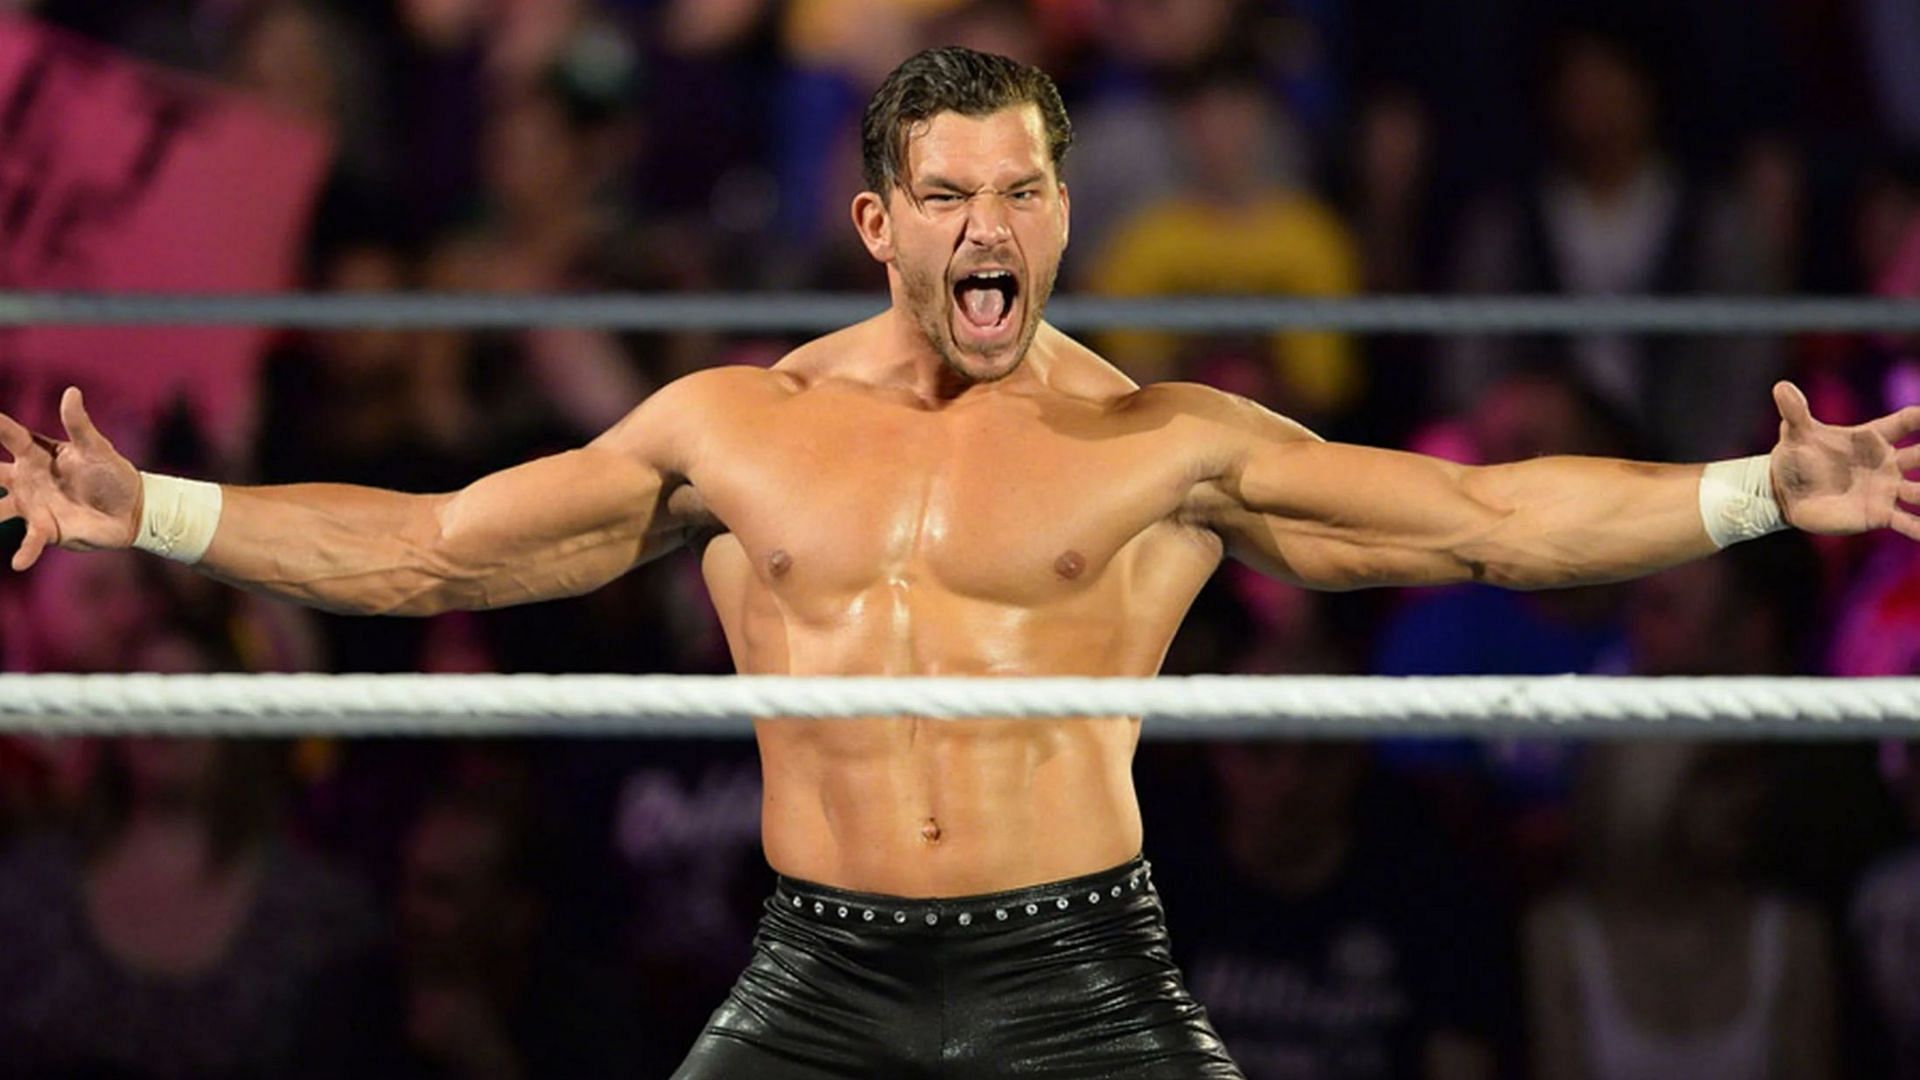 Fandango seemingly announced his retirement from in-ring competition